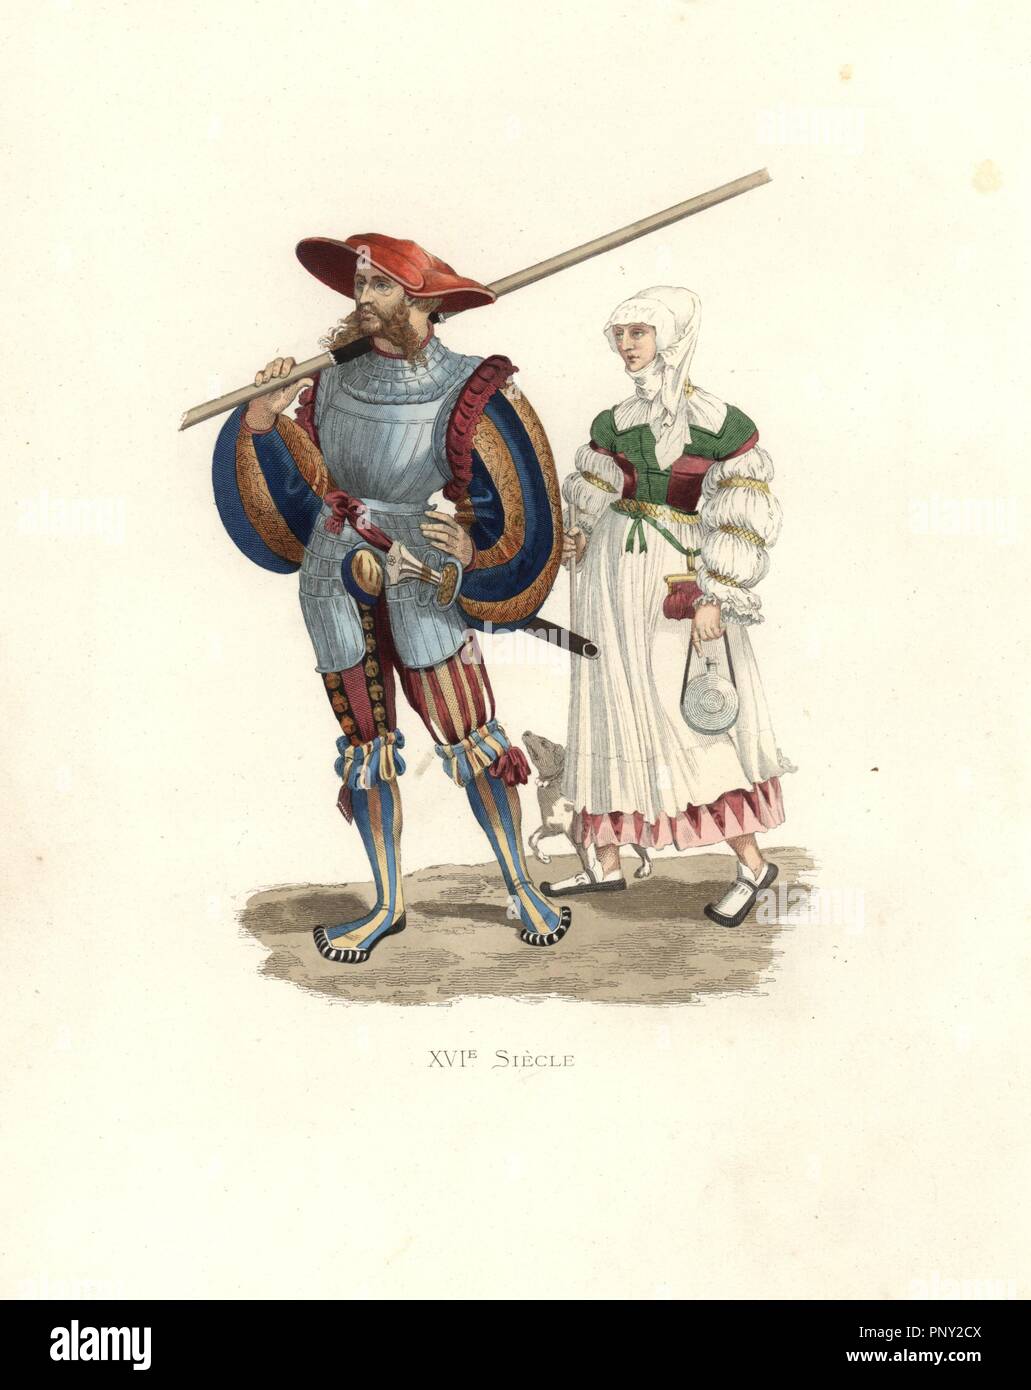 German lancer and peasant woman, 16th century, from a print by Hans Guldenmundt. The soldier in an extraordinary luxurious and flamboyant costume of breastplate, puff sleeves and multicolored striped stockings.. Handcolored illustration by E. Lechevallier-Chevignard, lithographed by A. Didier, L. Flamenq, F. Laguillermie, from Georges Duplessis's 'Costumes historiques des XVIe, XVIIe et XVIIIe siecles' (Historical costumes of the 16th, 17th and 18th centuries), Paris 1867. The book was a continuation of the series on the costumes of the 12th to 15th centuries published by Camille Bonnard and P Stock Photo